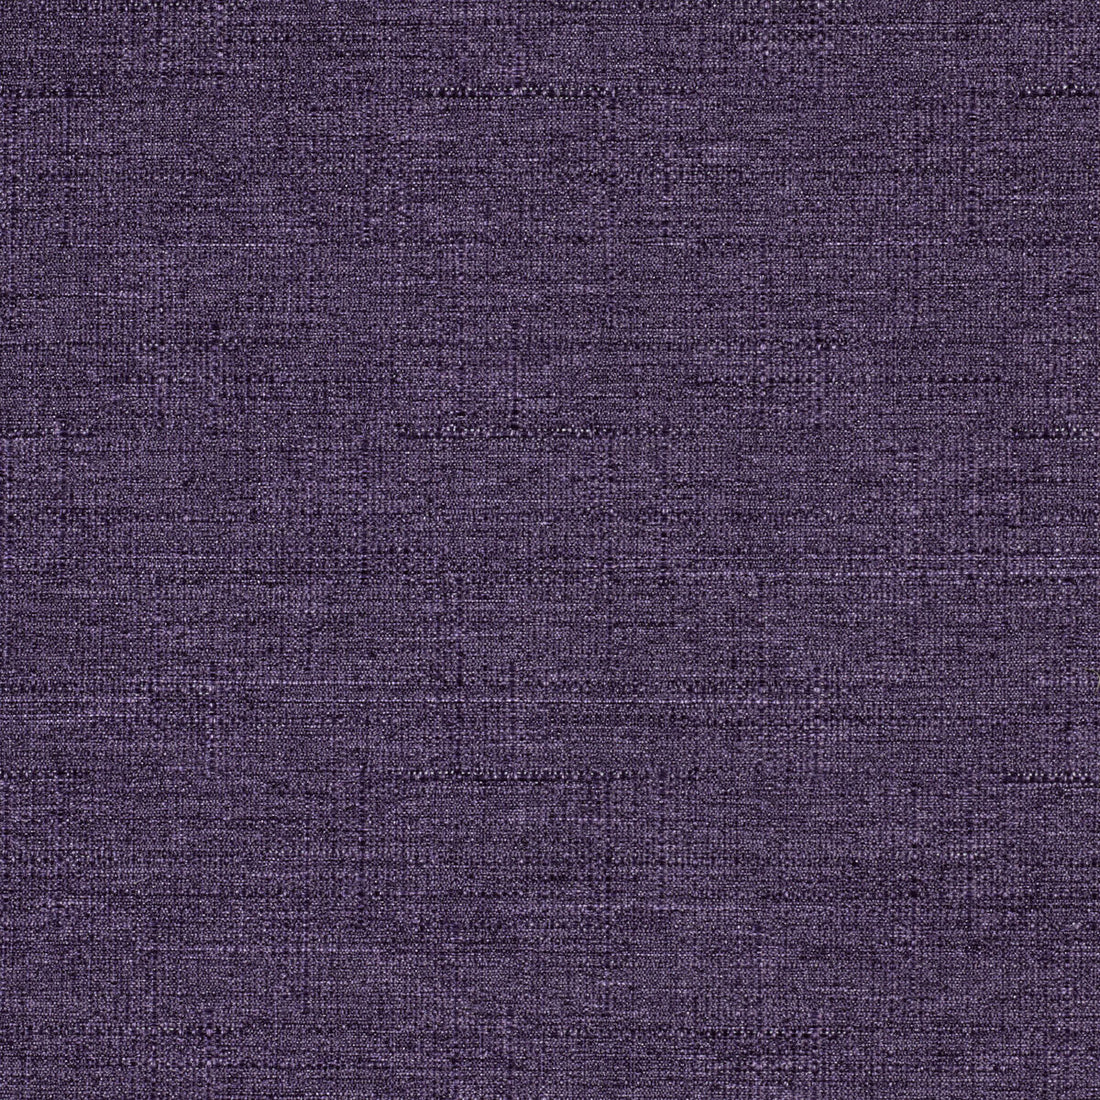 Kravet Contract fabric in 4321-10 color - pattern 4321.10.0 - by Kravet Contract